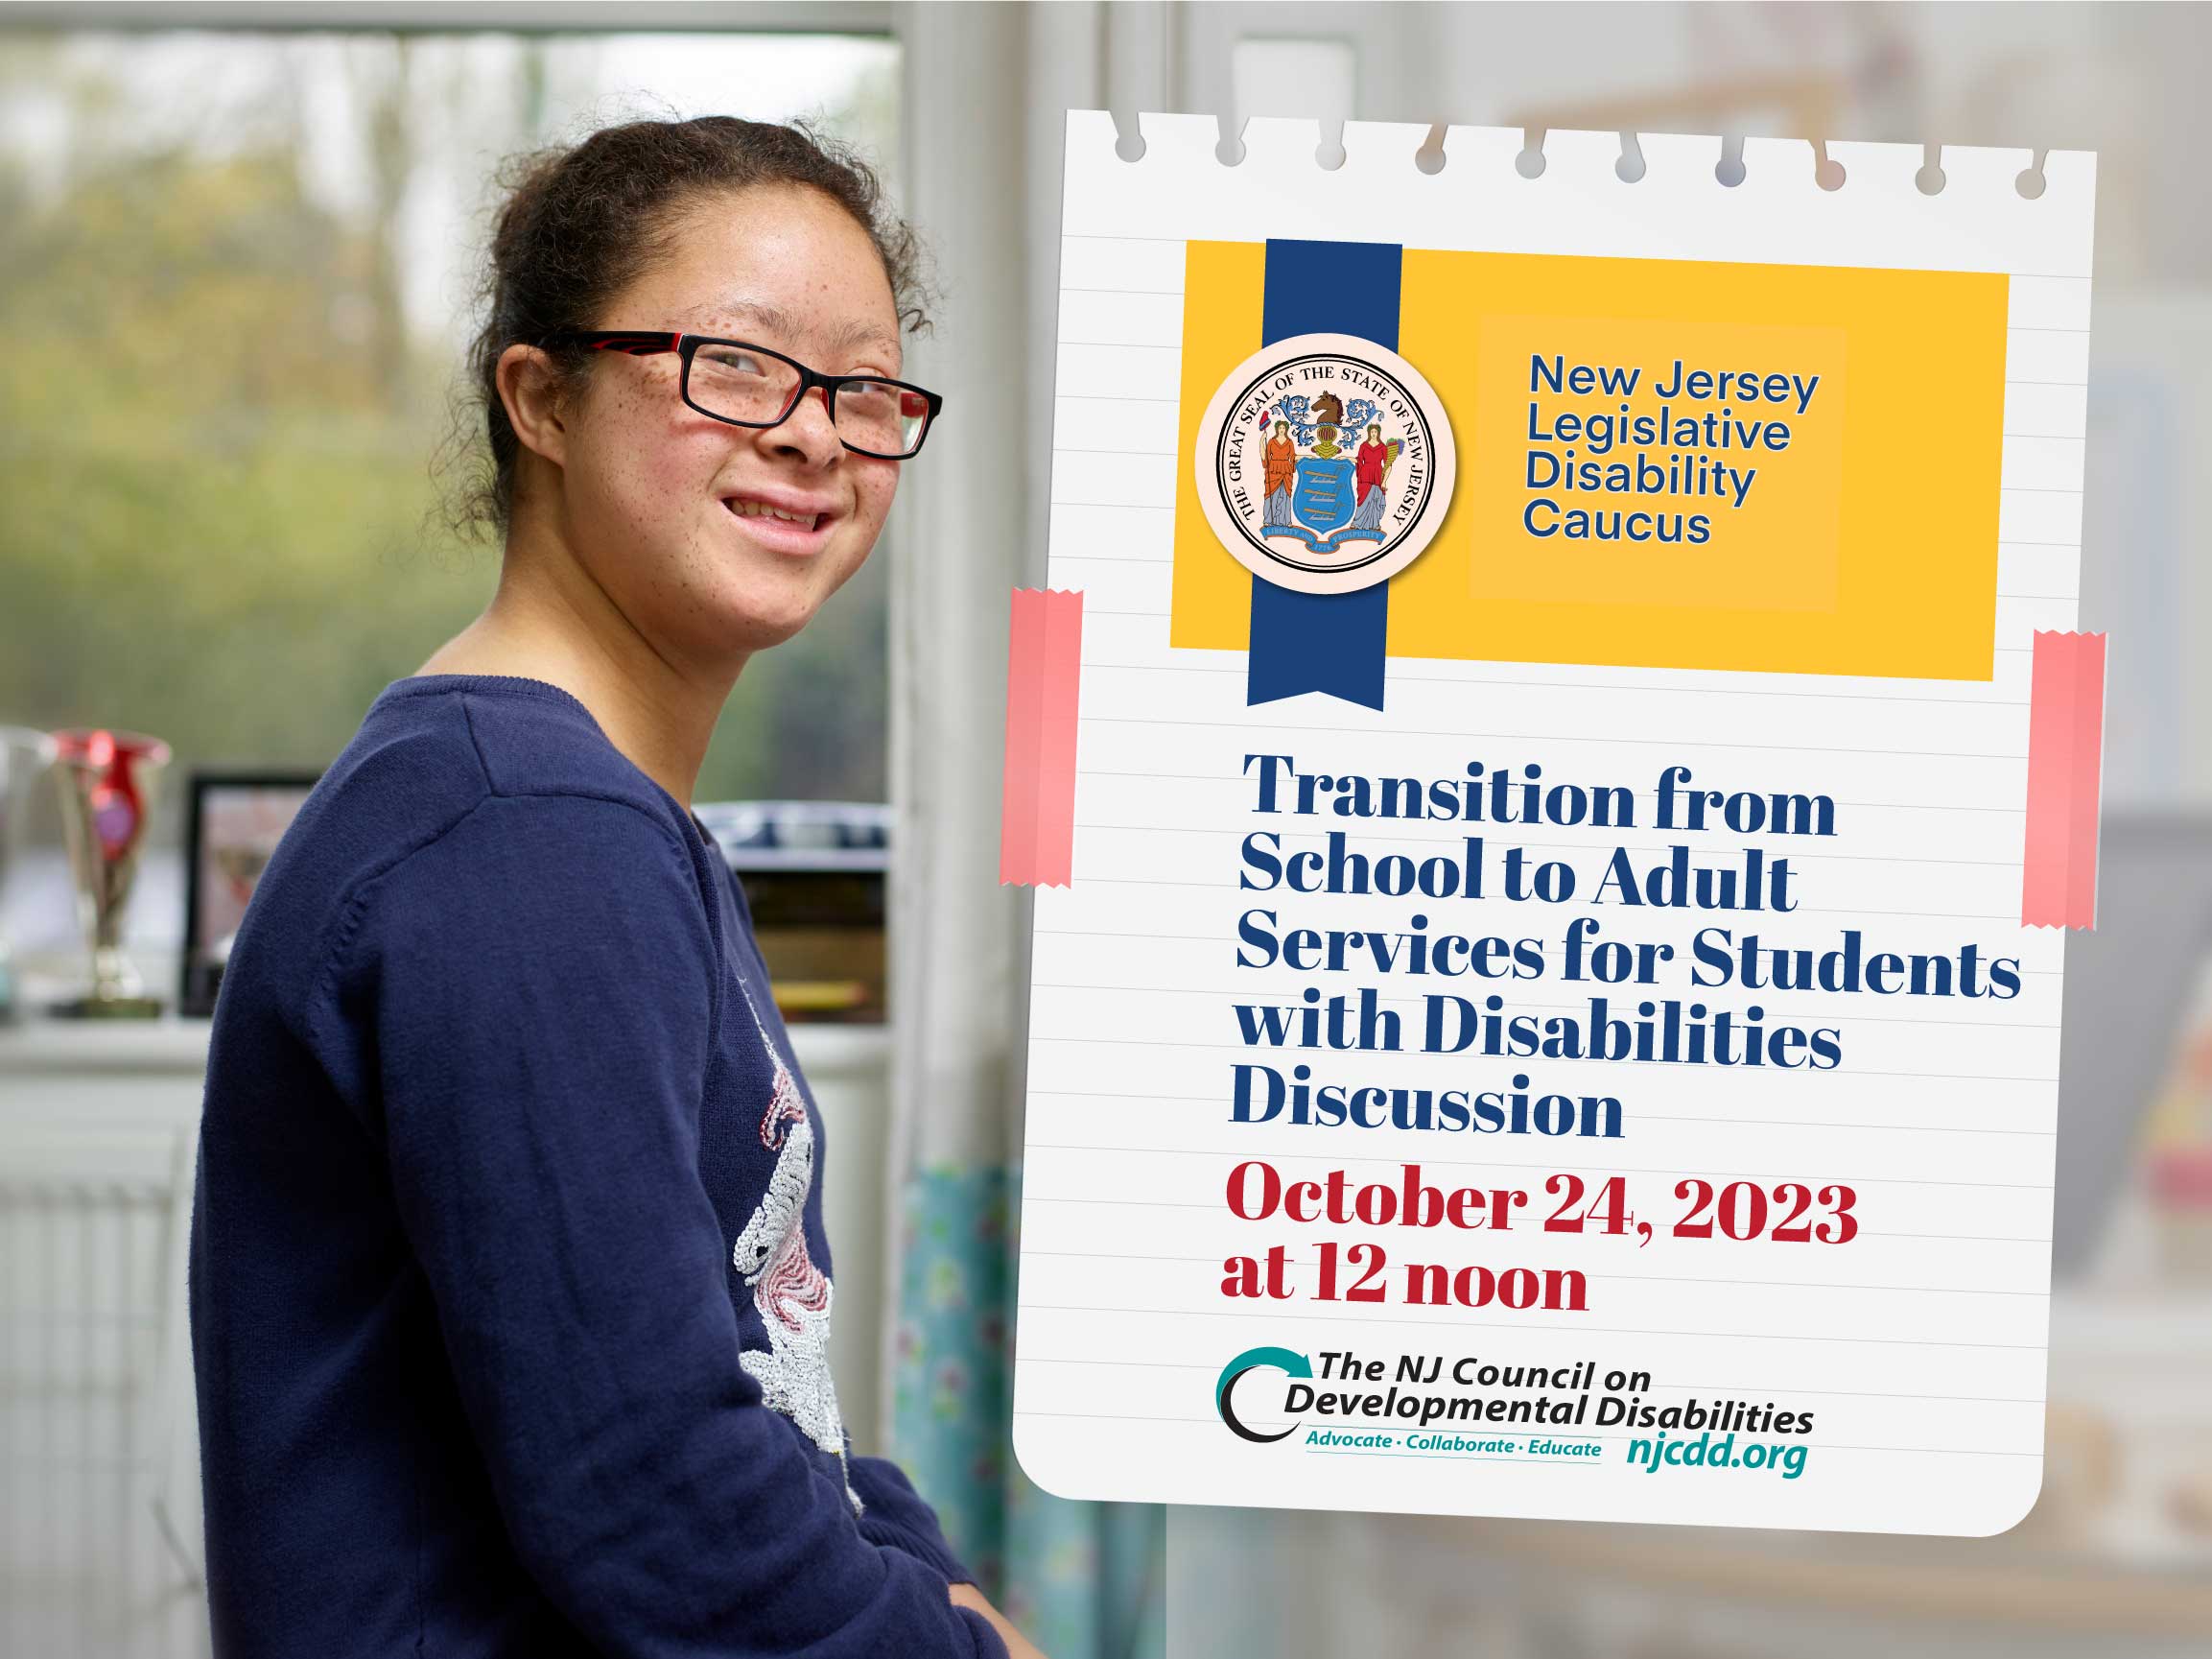 Transition-from-School-to-Adult-Services-for-Students-with-Disabilities